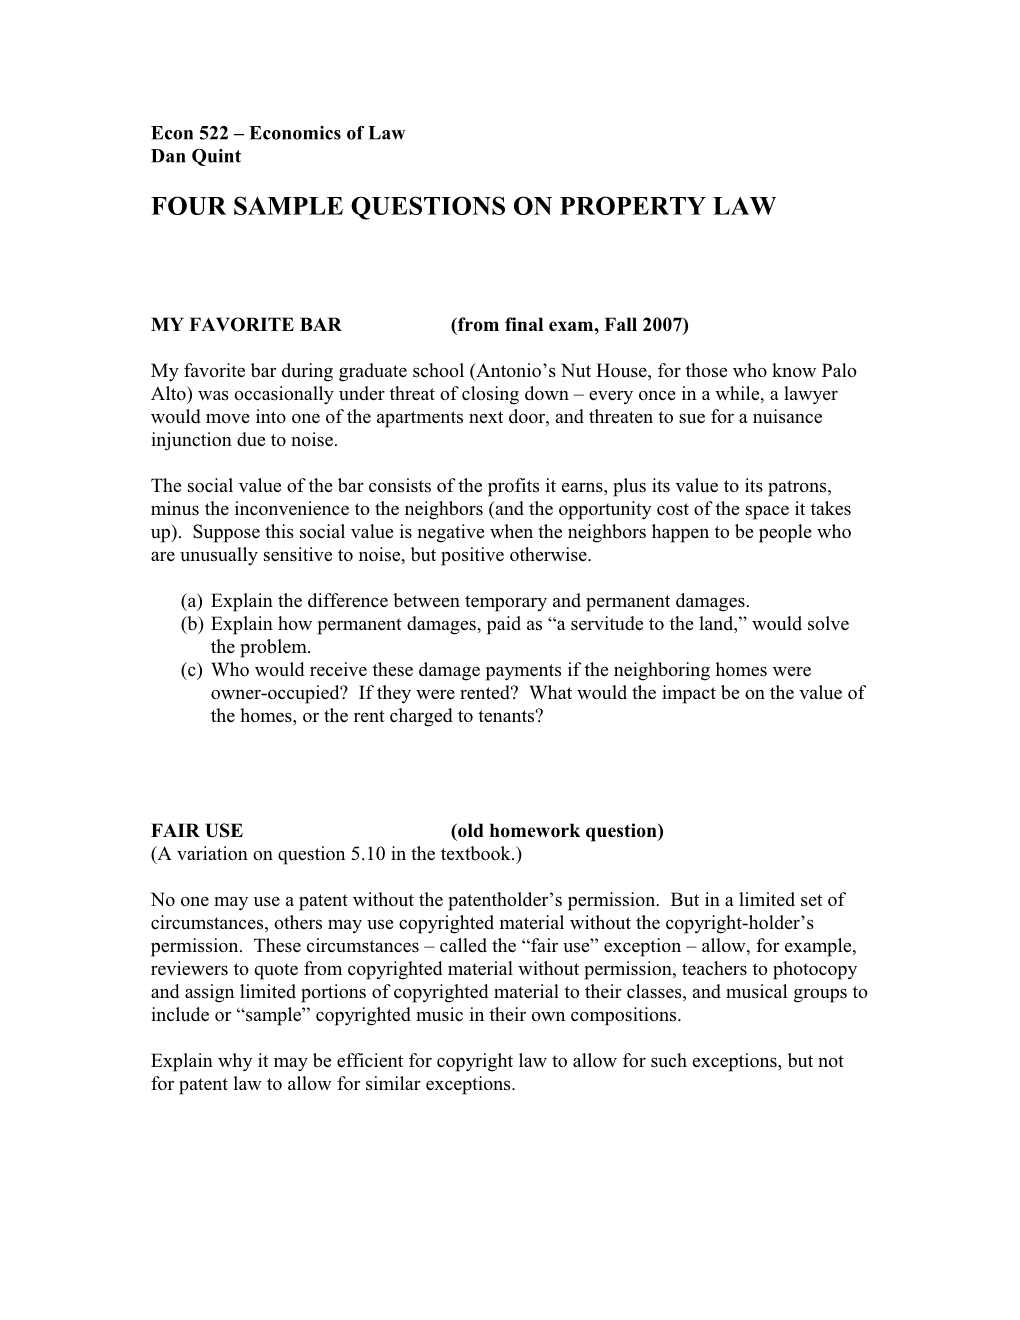 Four Sample Questions on Property Law